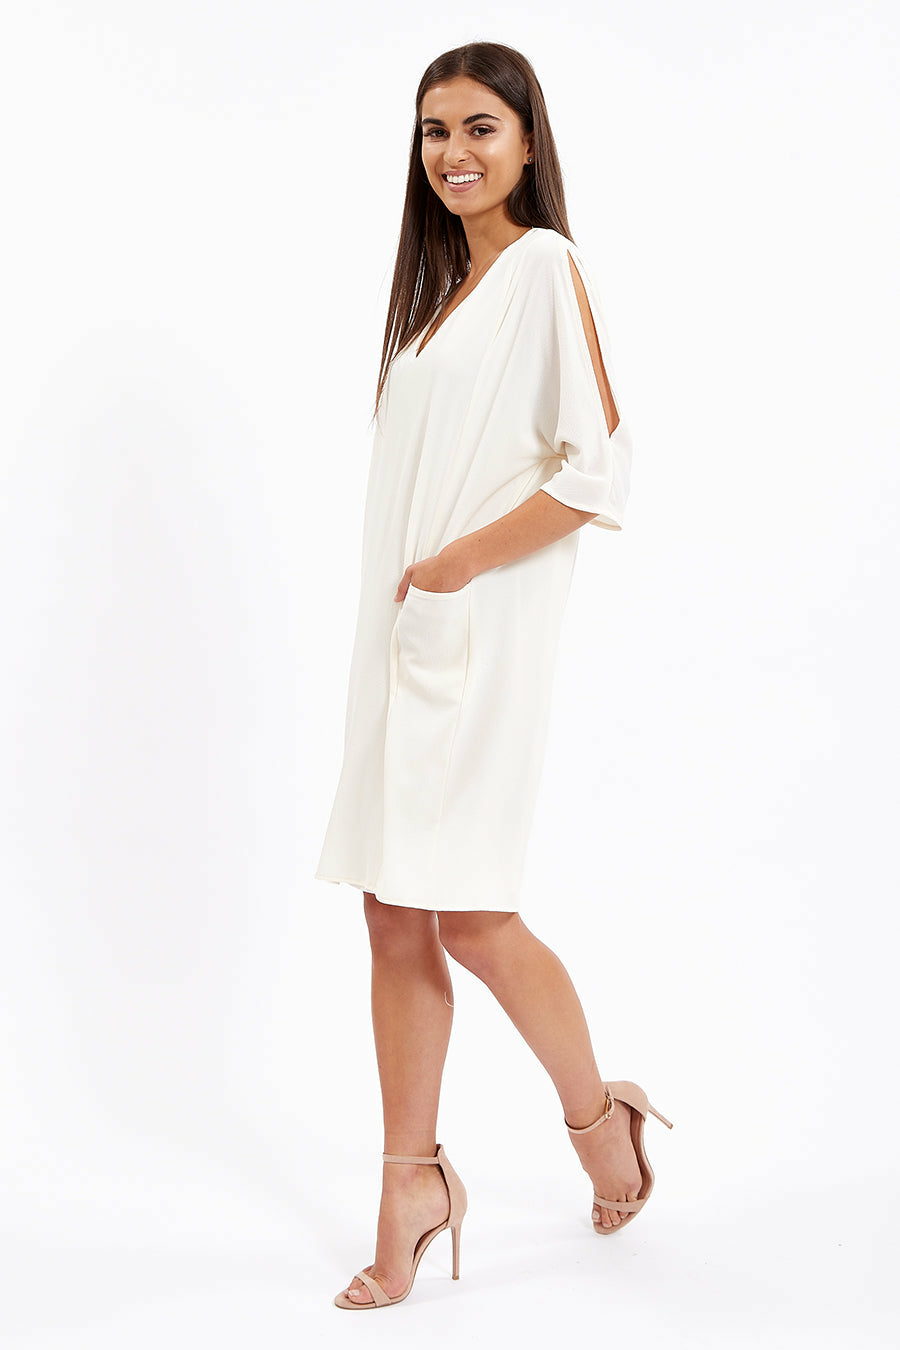 Divine White Relaxed Fit Midi Dress With Pockets JEN30166-W